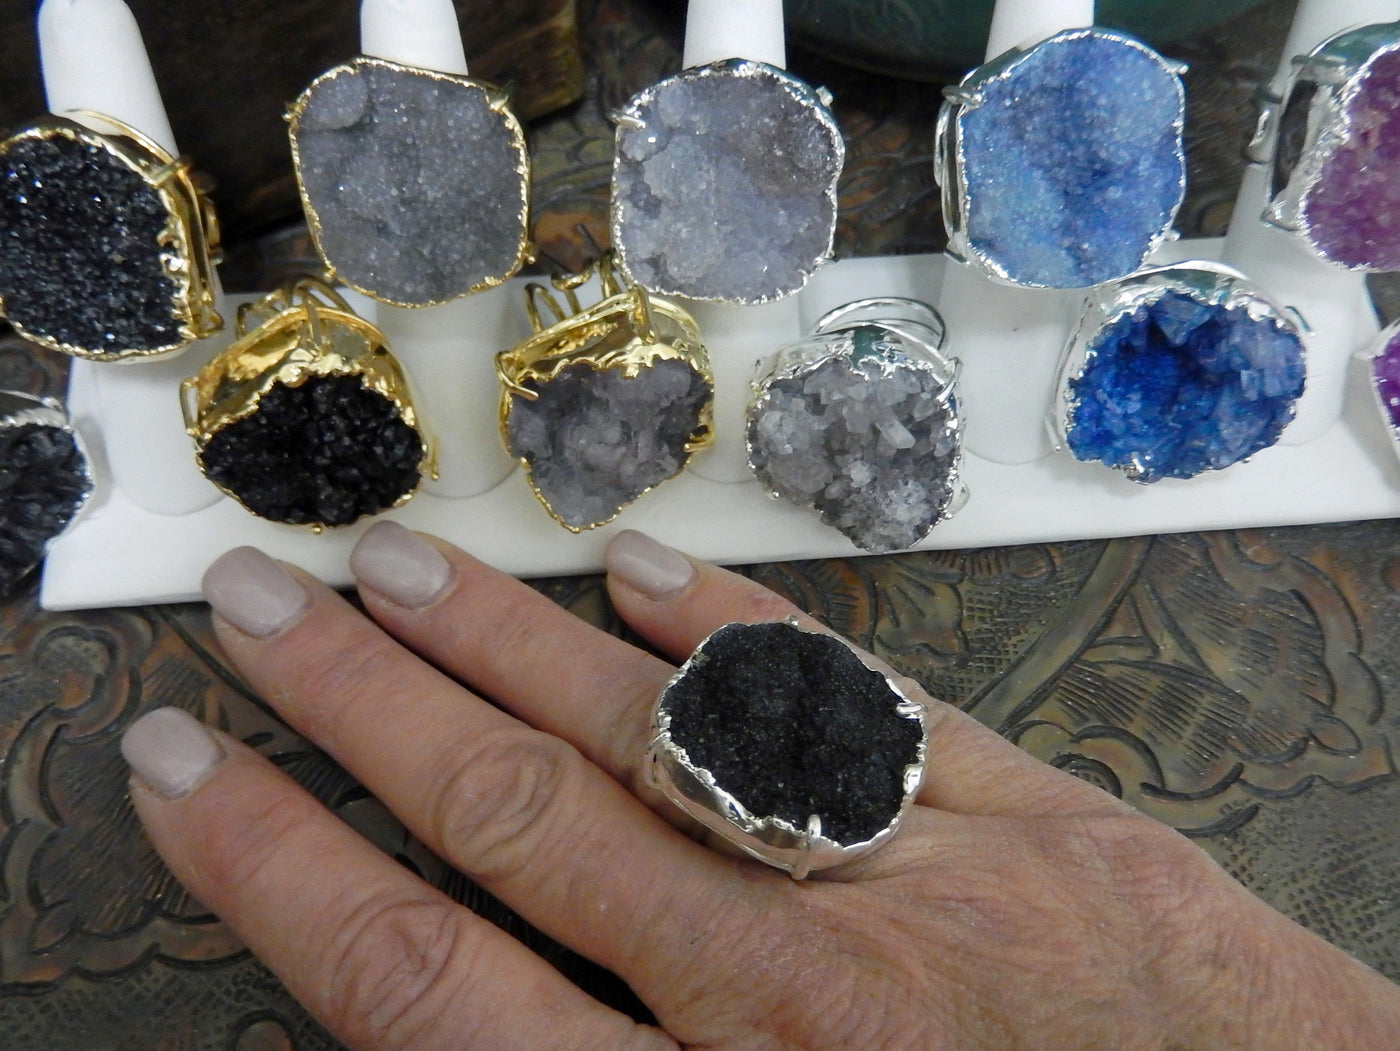 Druzy Rings displayed in electroplated 24k gold and silver and one ring on hand for size reference